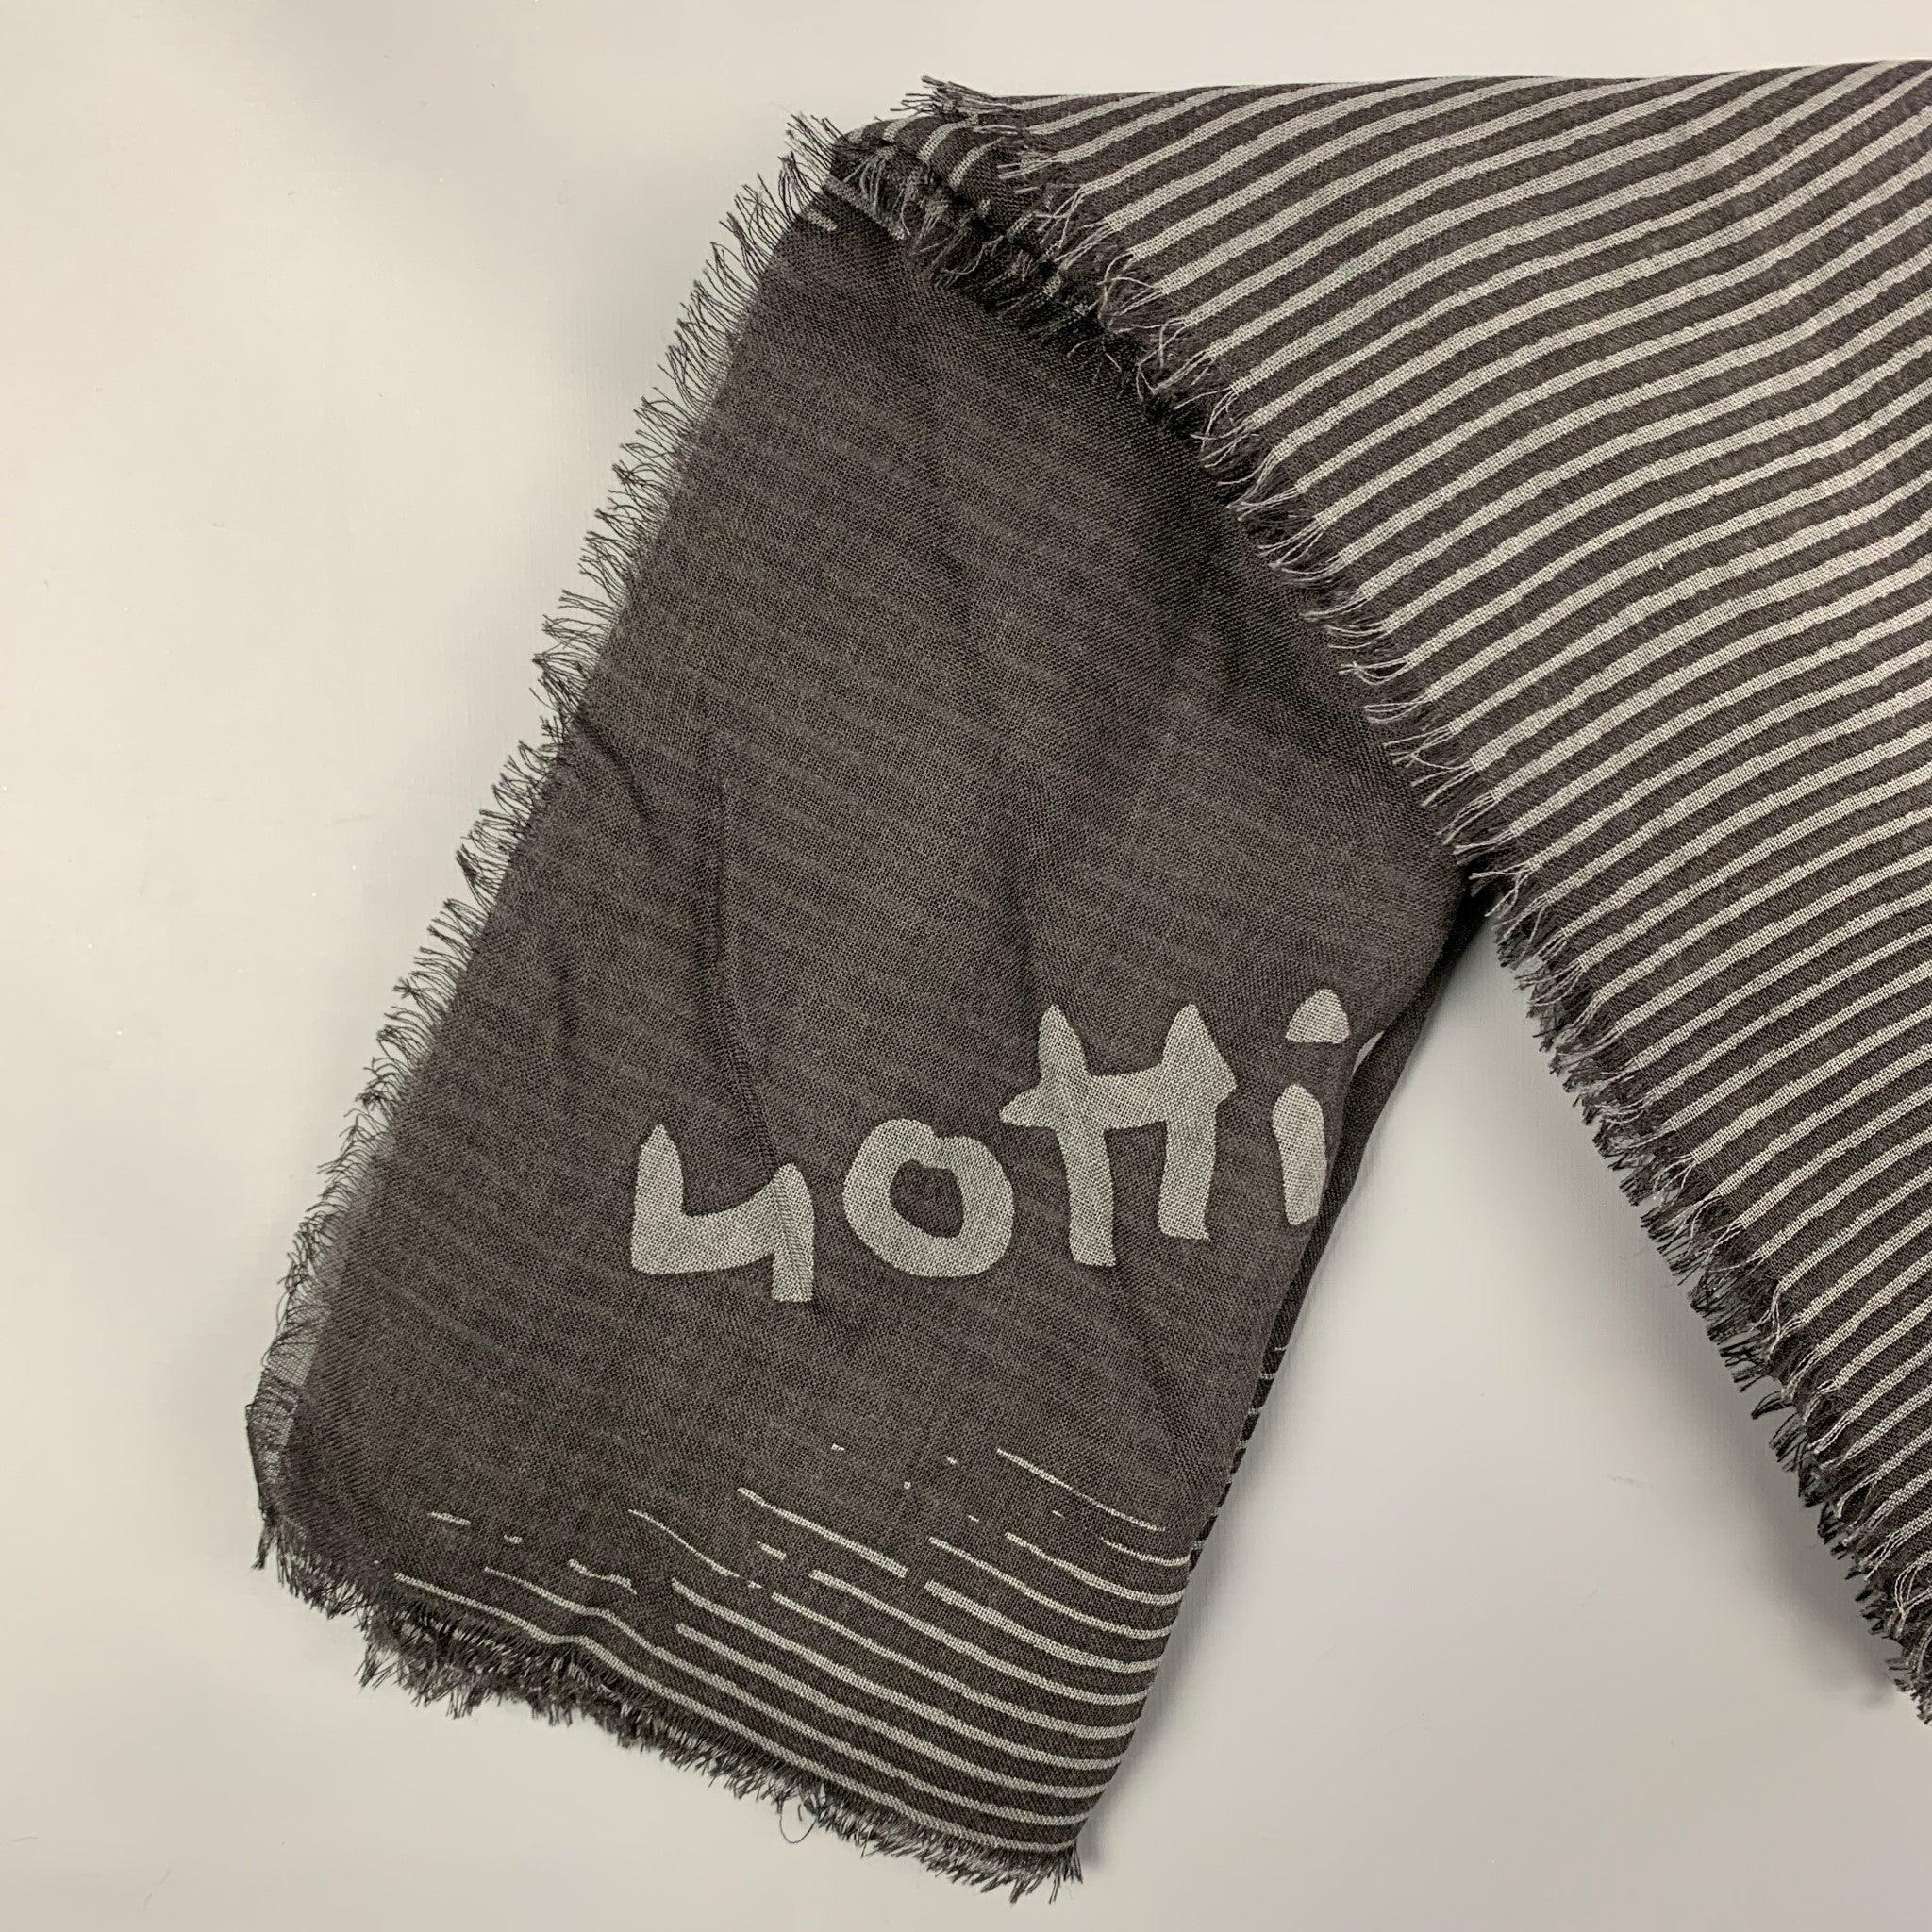 LOUIS VUITTON scarf comes in a black & grey stripe wool / silk with a fringe trim. Made in Italy. Very Good
Pre-Owned Condition. 

Measurements: 
  54 inches  x 54 inches 
  
  
 
Reference: 120136
Category: Scarves
More Details
    
Brand:  LOUIS